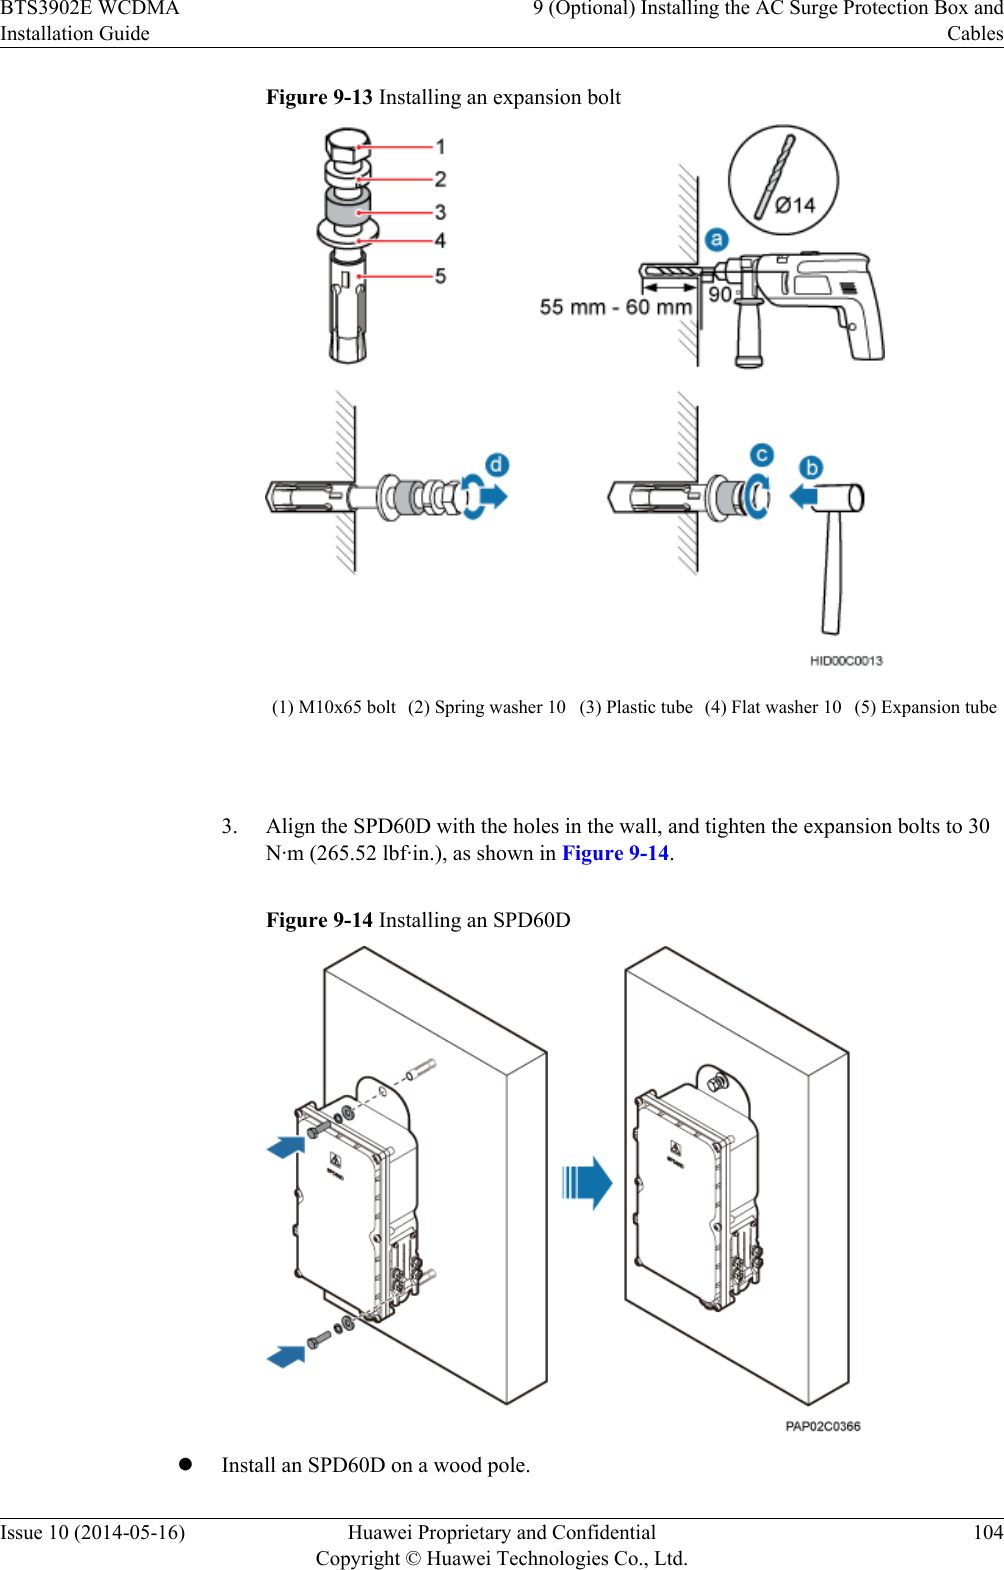 Figure 9-13 Installing an expansion bolt(1) M10x65 bolt (2) Spring washer 10 (3) Plastic tube (4) Flat washer 10 (5) Expansion tube 3. Align the SPD60D with the holes in the wall, and tighten the expansion bolts to 30N·m (265.52 lbf·in.), as shown in Figure 9-14.Figure 9-14 Installing an SPD60DlInstall an SPD60D on a wood pole.BTS3902E WCDMAInstallation Guide9 (Optional) Installing the AC Surge Protection Box andCablesIssue 10 (2014-05-16) Huawei Proprietary and ConfidentialCopyright © Huawei Technologies Co., Ltd.104